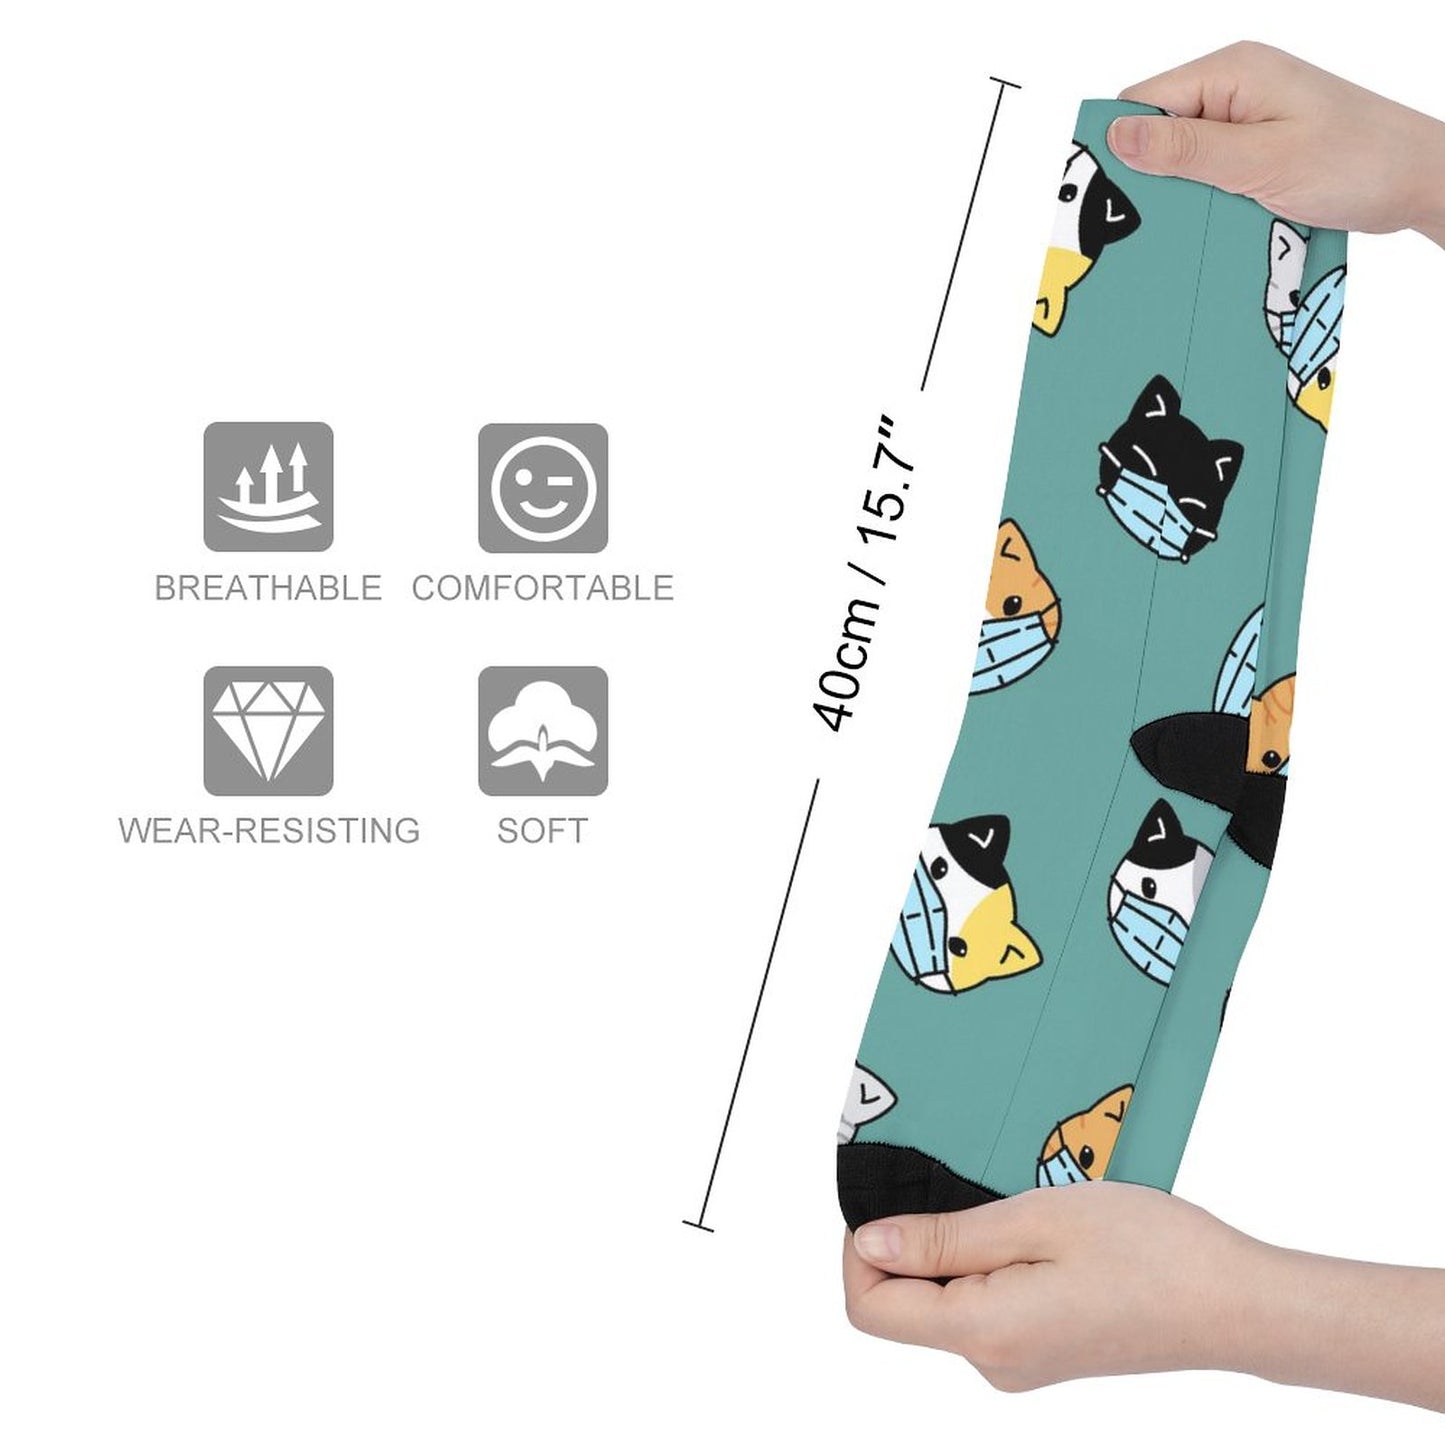 Online Customize Color Matching Stockings A Cat in A Mask One Size